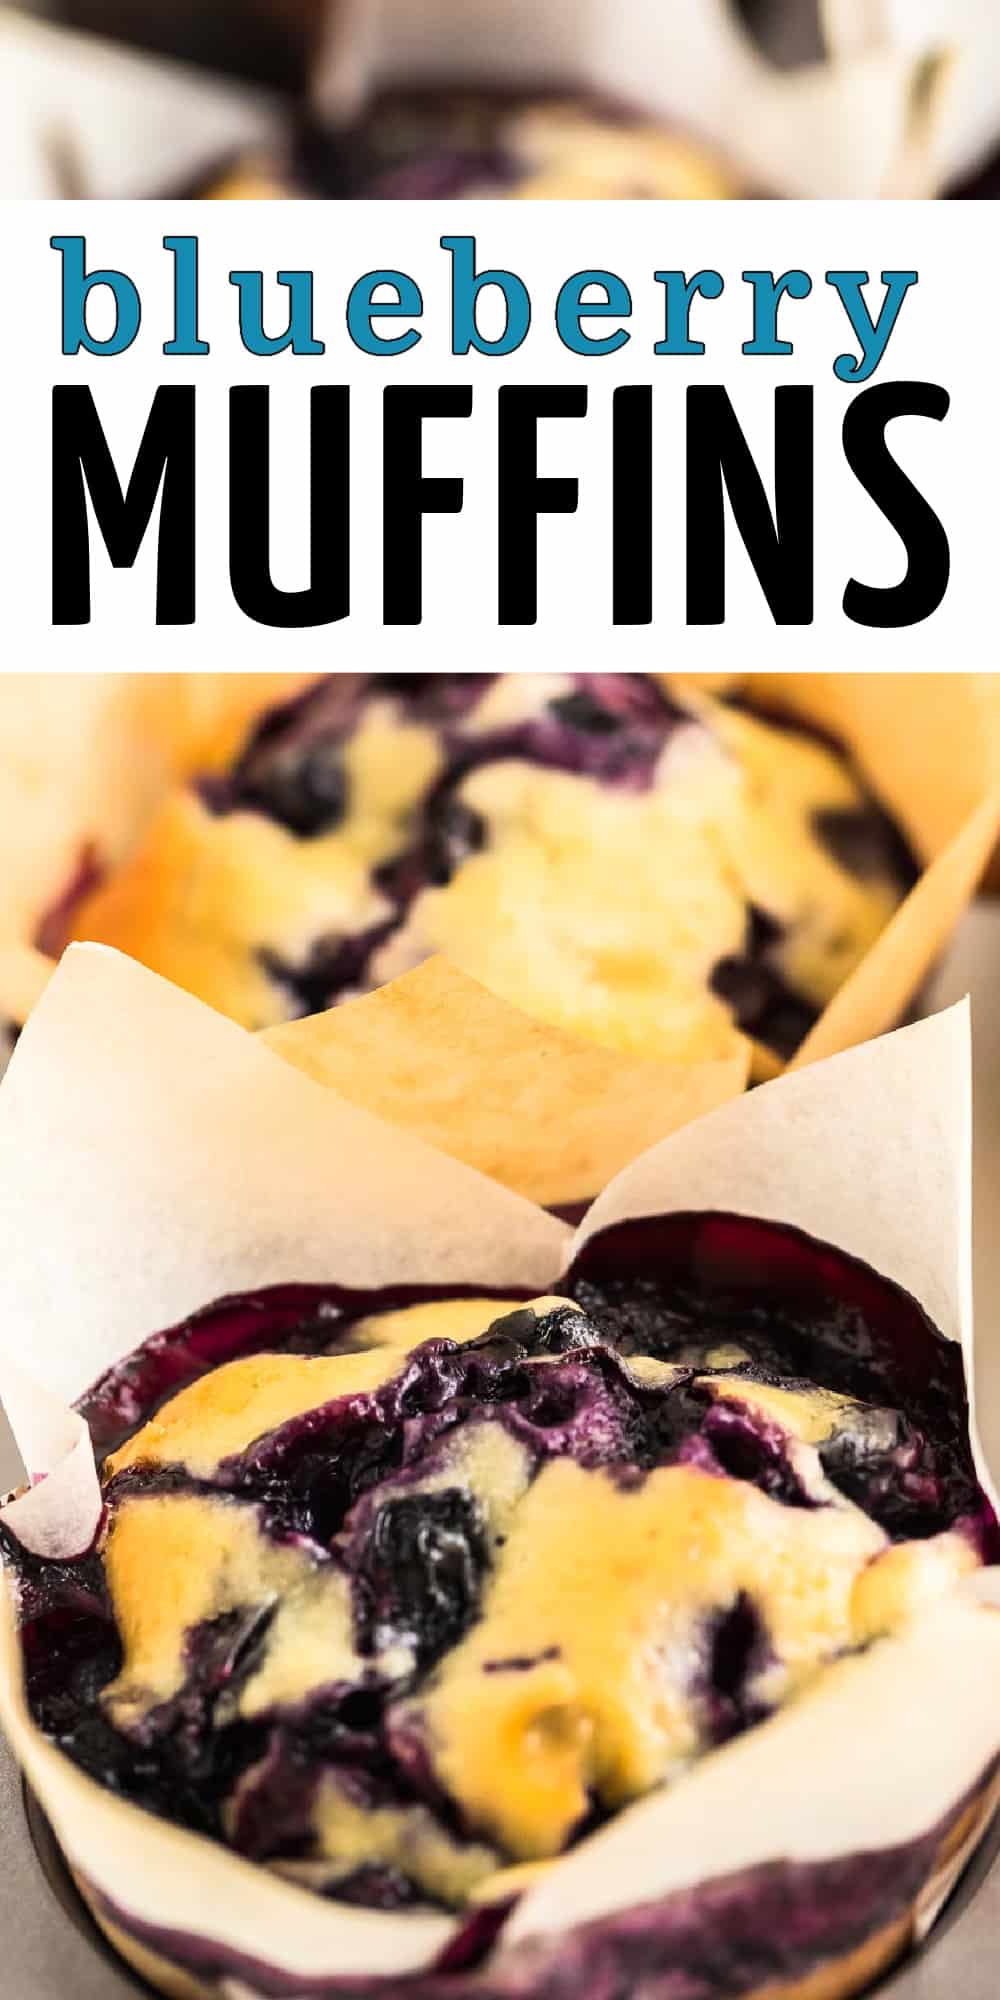 These homemade Blueberry Muffins look and taste like they come from a fancy bakery but easy to make yourself. It's the only Blueberry Muffin Recipe you'll ever need. Perfect as a breakfast muffin or an on-the-go treat.
Easy Made From Scratch Blueberry Muffins #cheerfulcook #blueberrymuffins #blueberry #recipe #best via @cheerfulcook